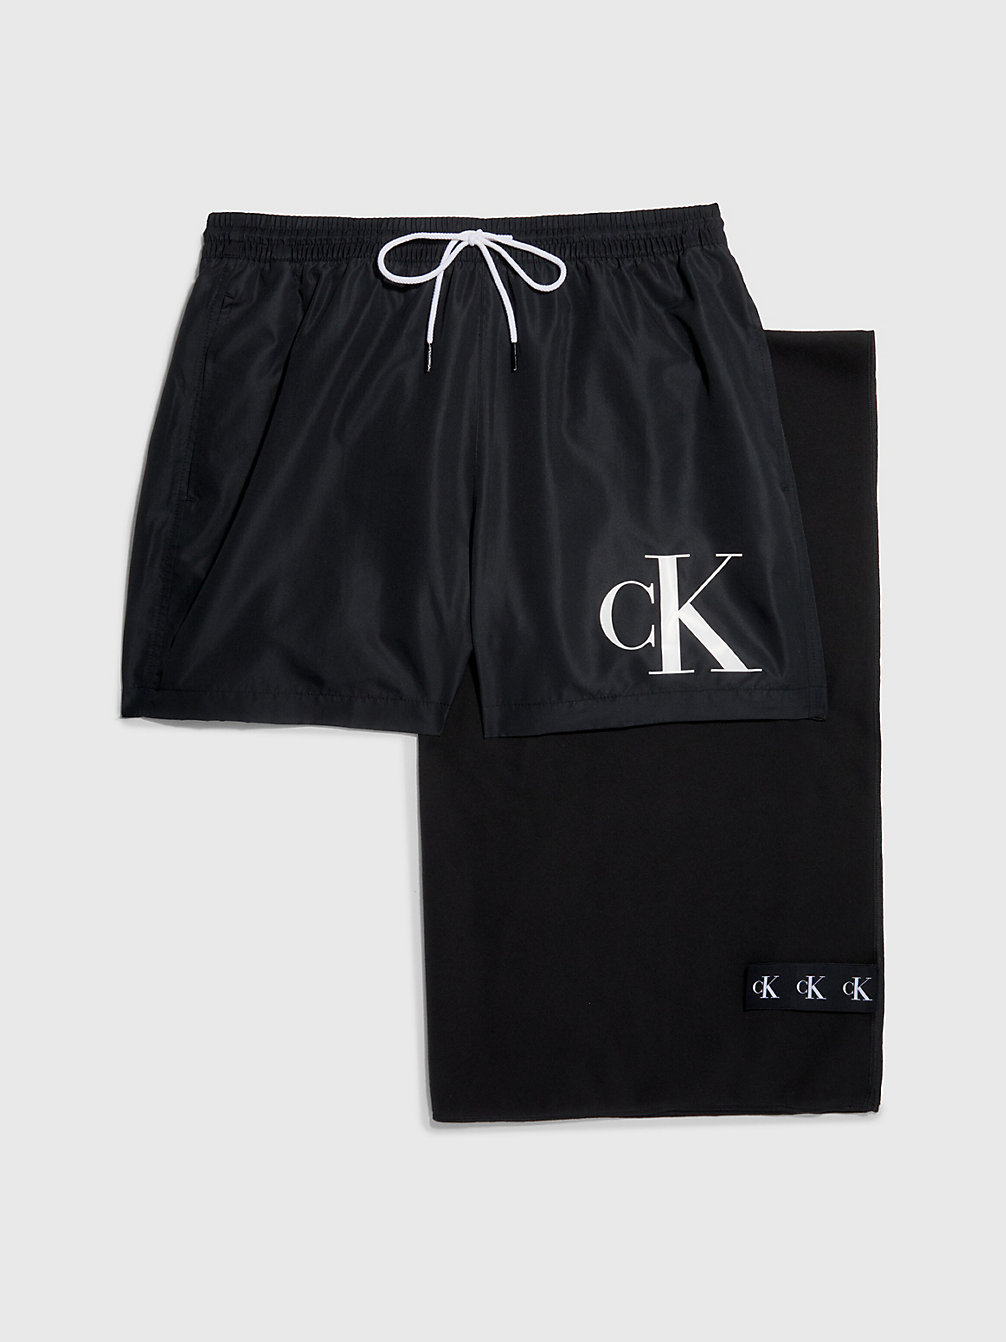 PVH BLACK Swim Shorts And Towel Gift Pack undefined men Calvin Klein